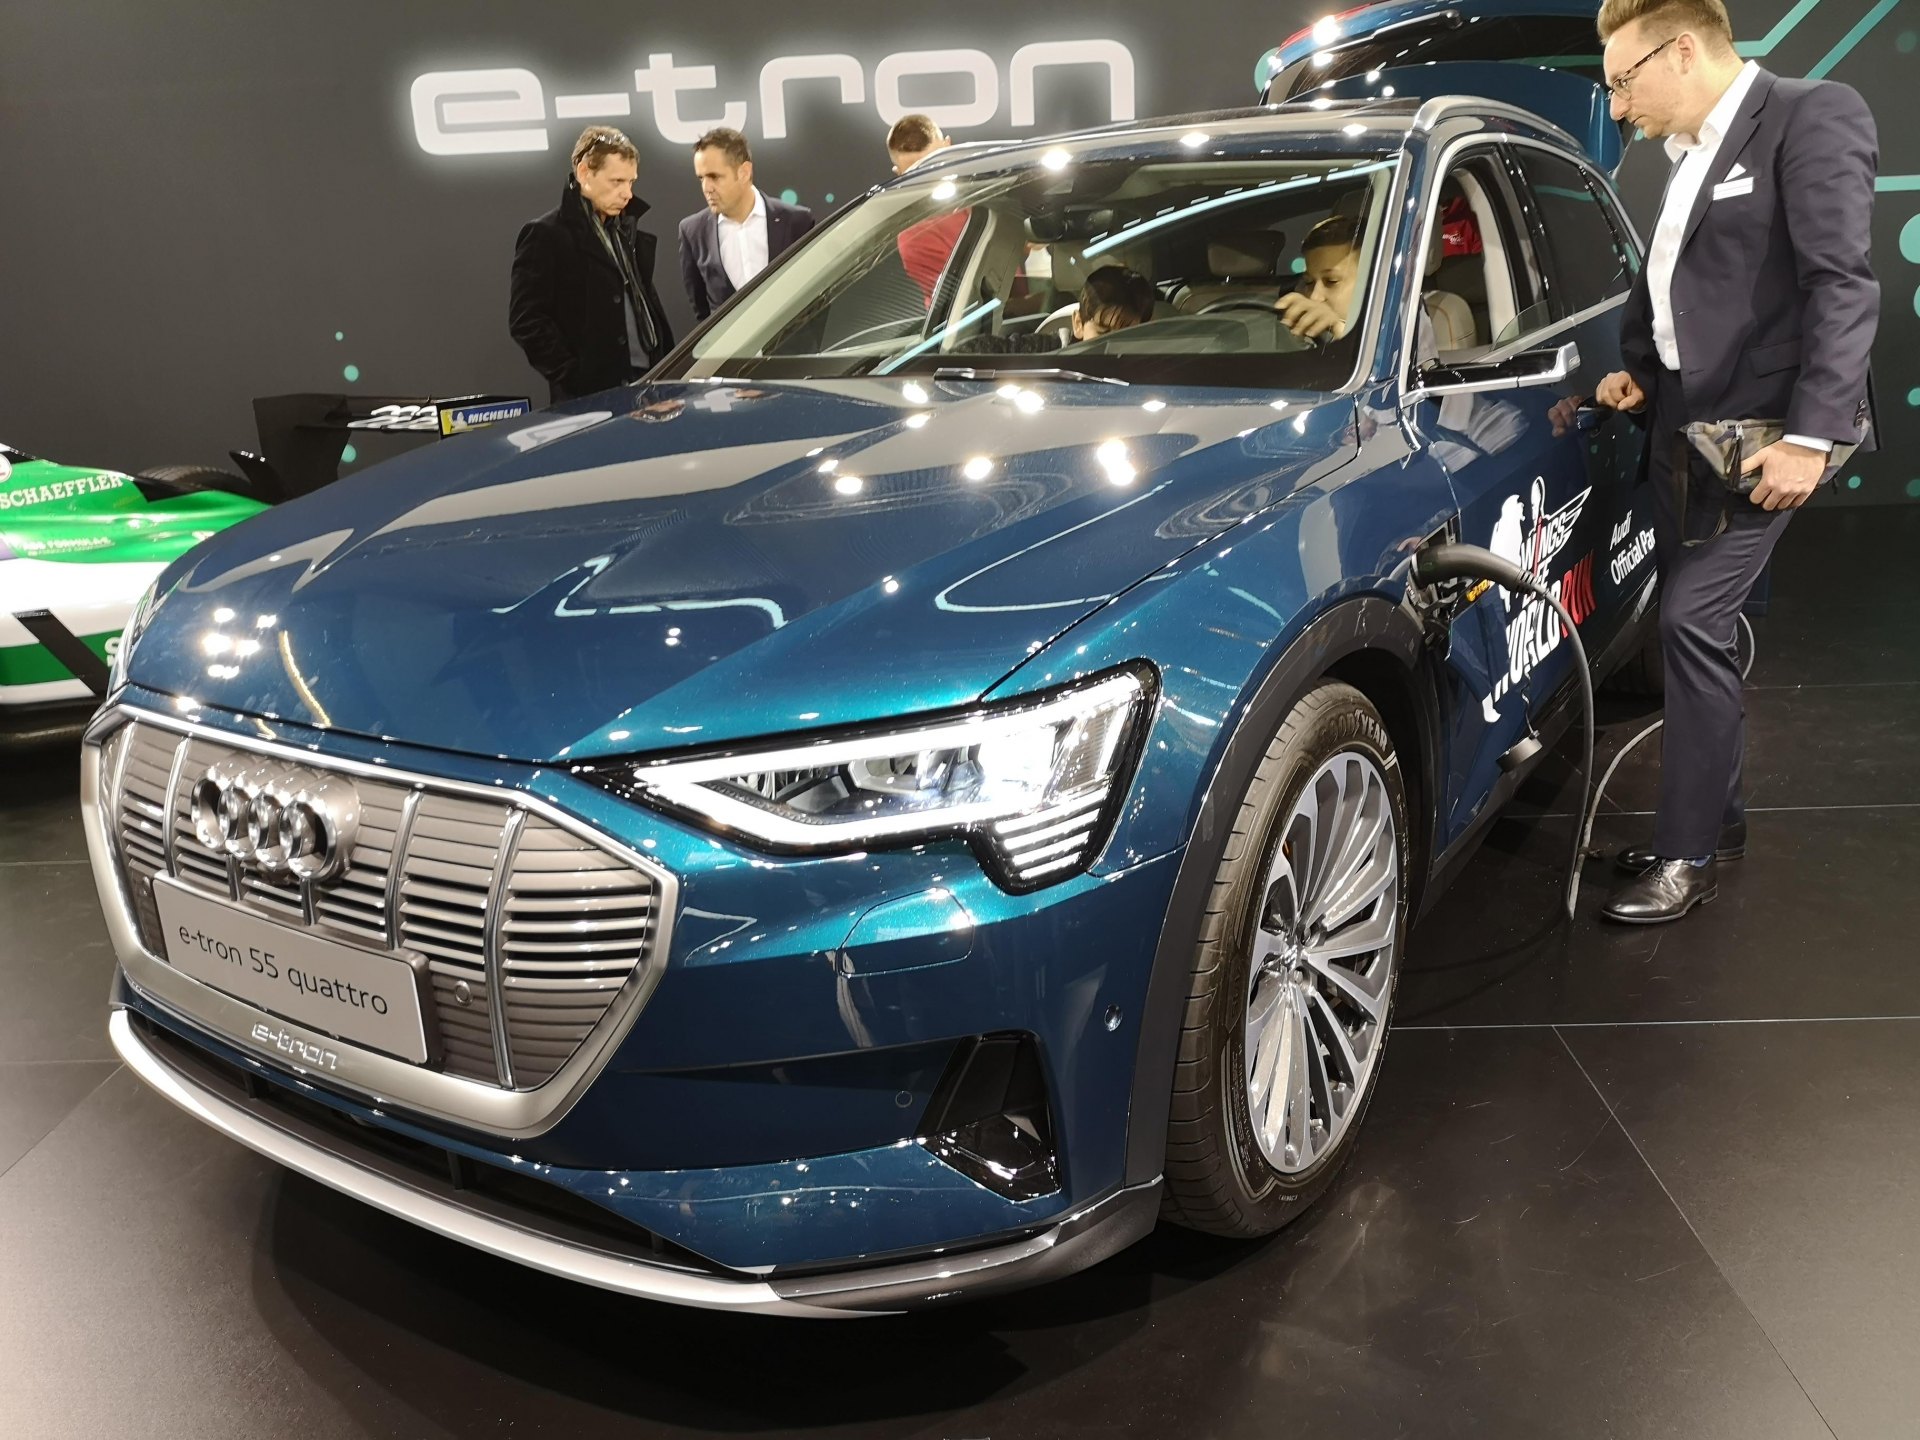 eMobility and Electric vehicles at the Vienna Auto Show 2019 - As #Ampeco previously posted, our team decided to have a look at Austria's biggest auto show that took place in Vienna from 10th to 13th of January 2019 and see how electric autos are represented this year. Although the Vienna Auto Show cannot compete with the Geneva Auto Show it definitely attracted strong international interest and showed where the future of mobility is heading. Electric vehicles were one of the highlights of the event, gathering huge crowds eager to see where this technology is heading. Acknowledging the increasing interest, for the first time at the show the organizers set a dedicated area for e-Mobility with a special focus on educating people on the what, why and how electric vehicles are a great choice for your next car.